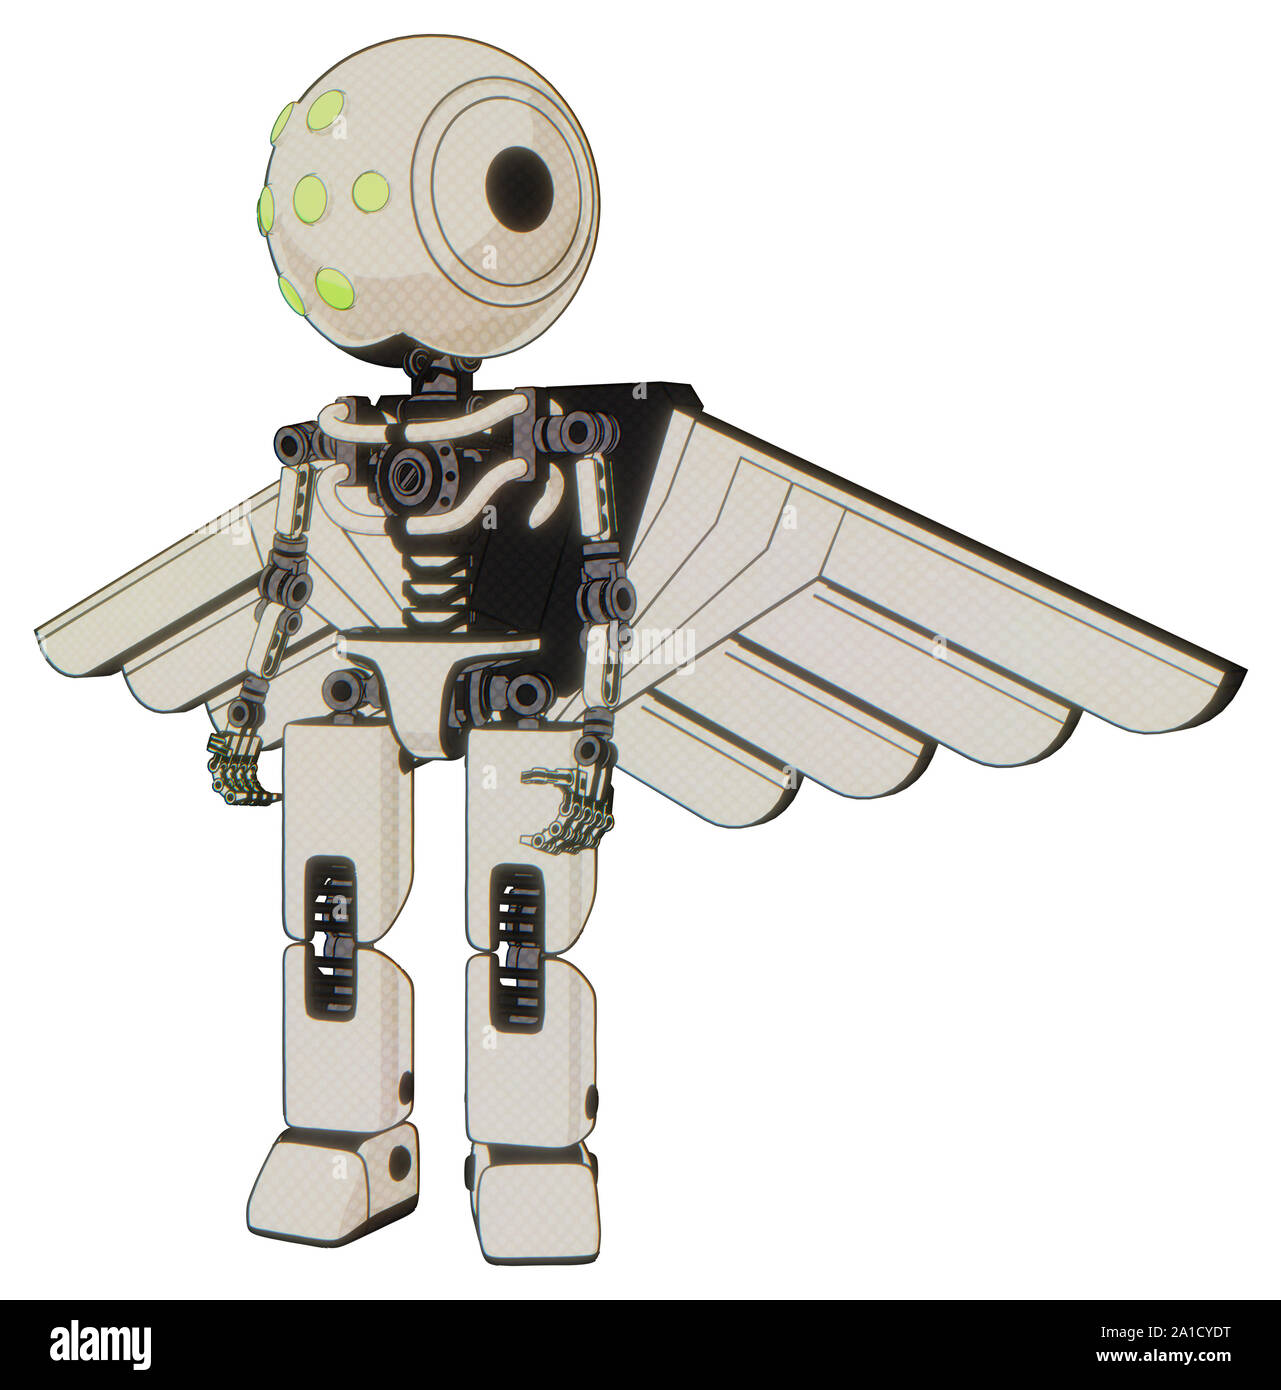 Robot containing elements: round head, green eyes array, light chest  exoshielding, pilot's wings assembly, no chest plating, prototype exoplate  legs Stock Photo - Alamy